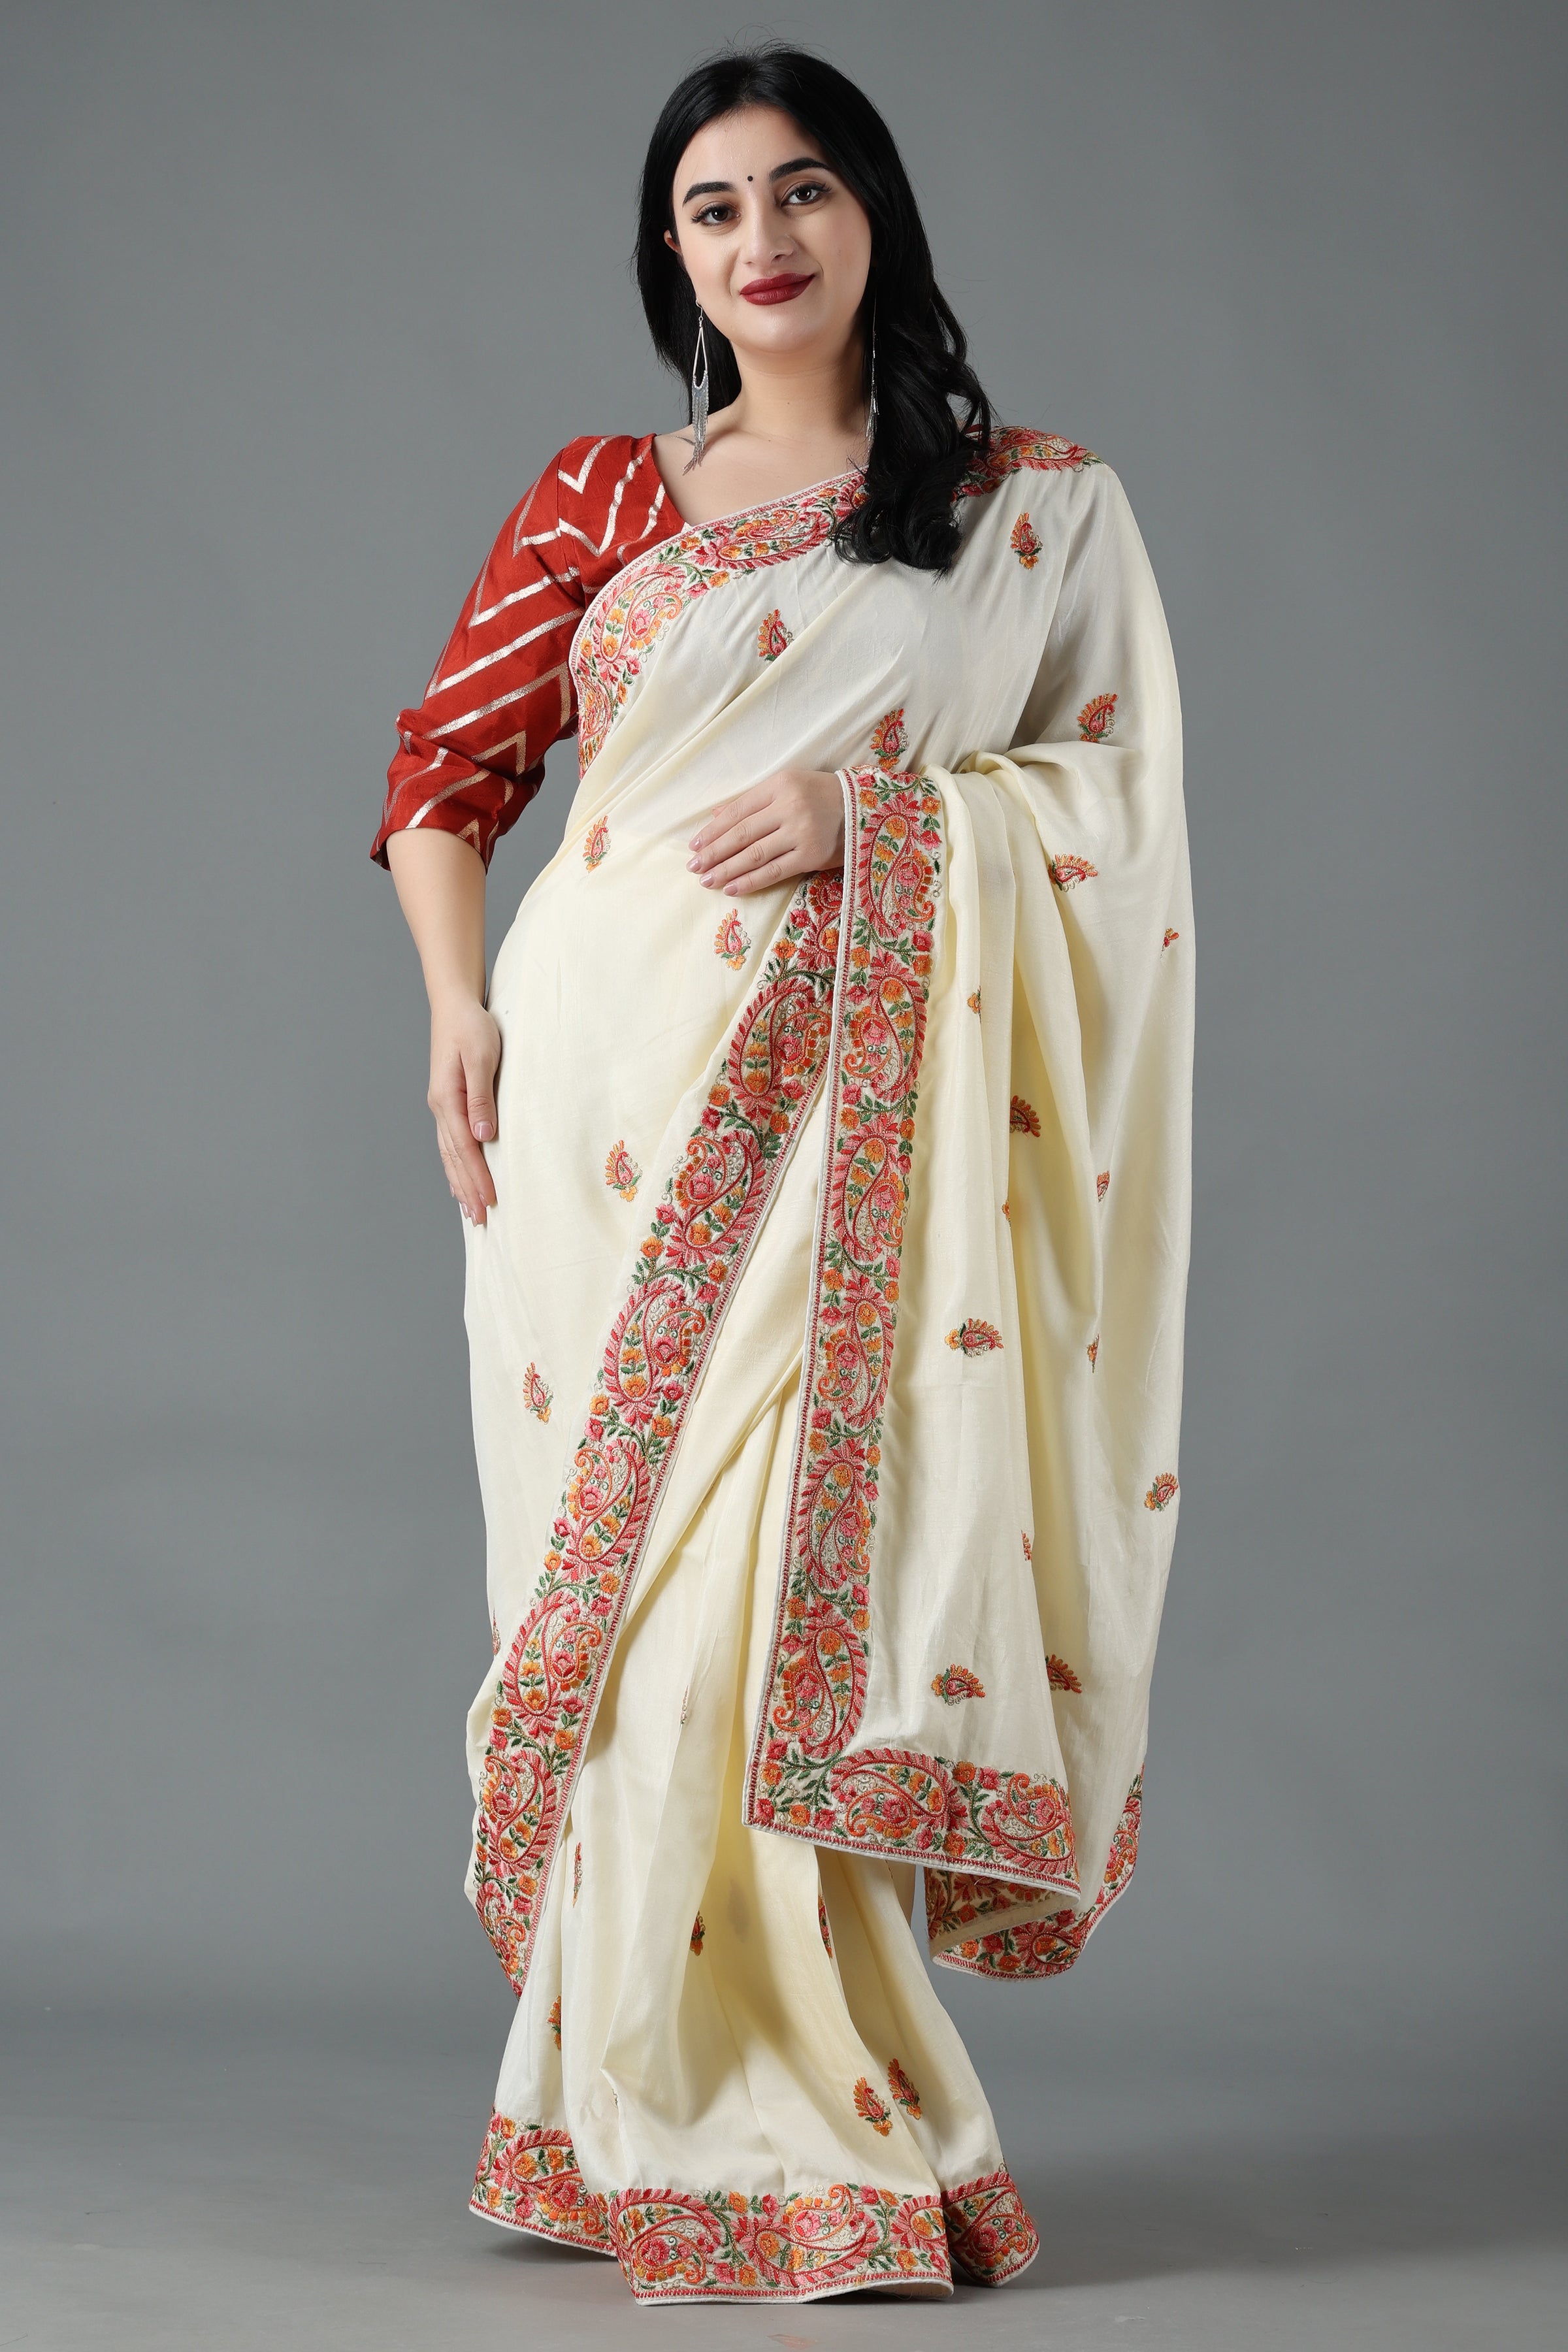 Fashionable Outfits Indian Burgundy Maroon Jute Saree With Embroidered  Blouse |SARV119142